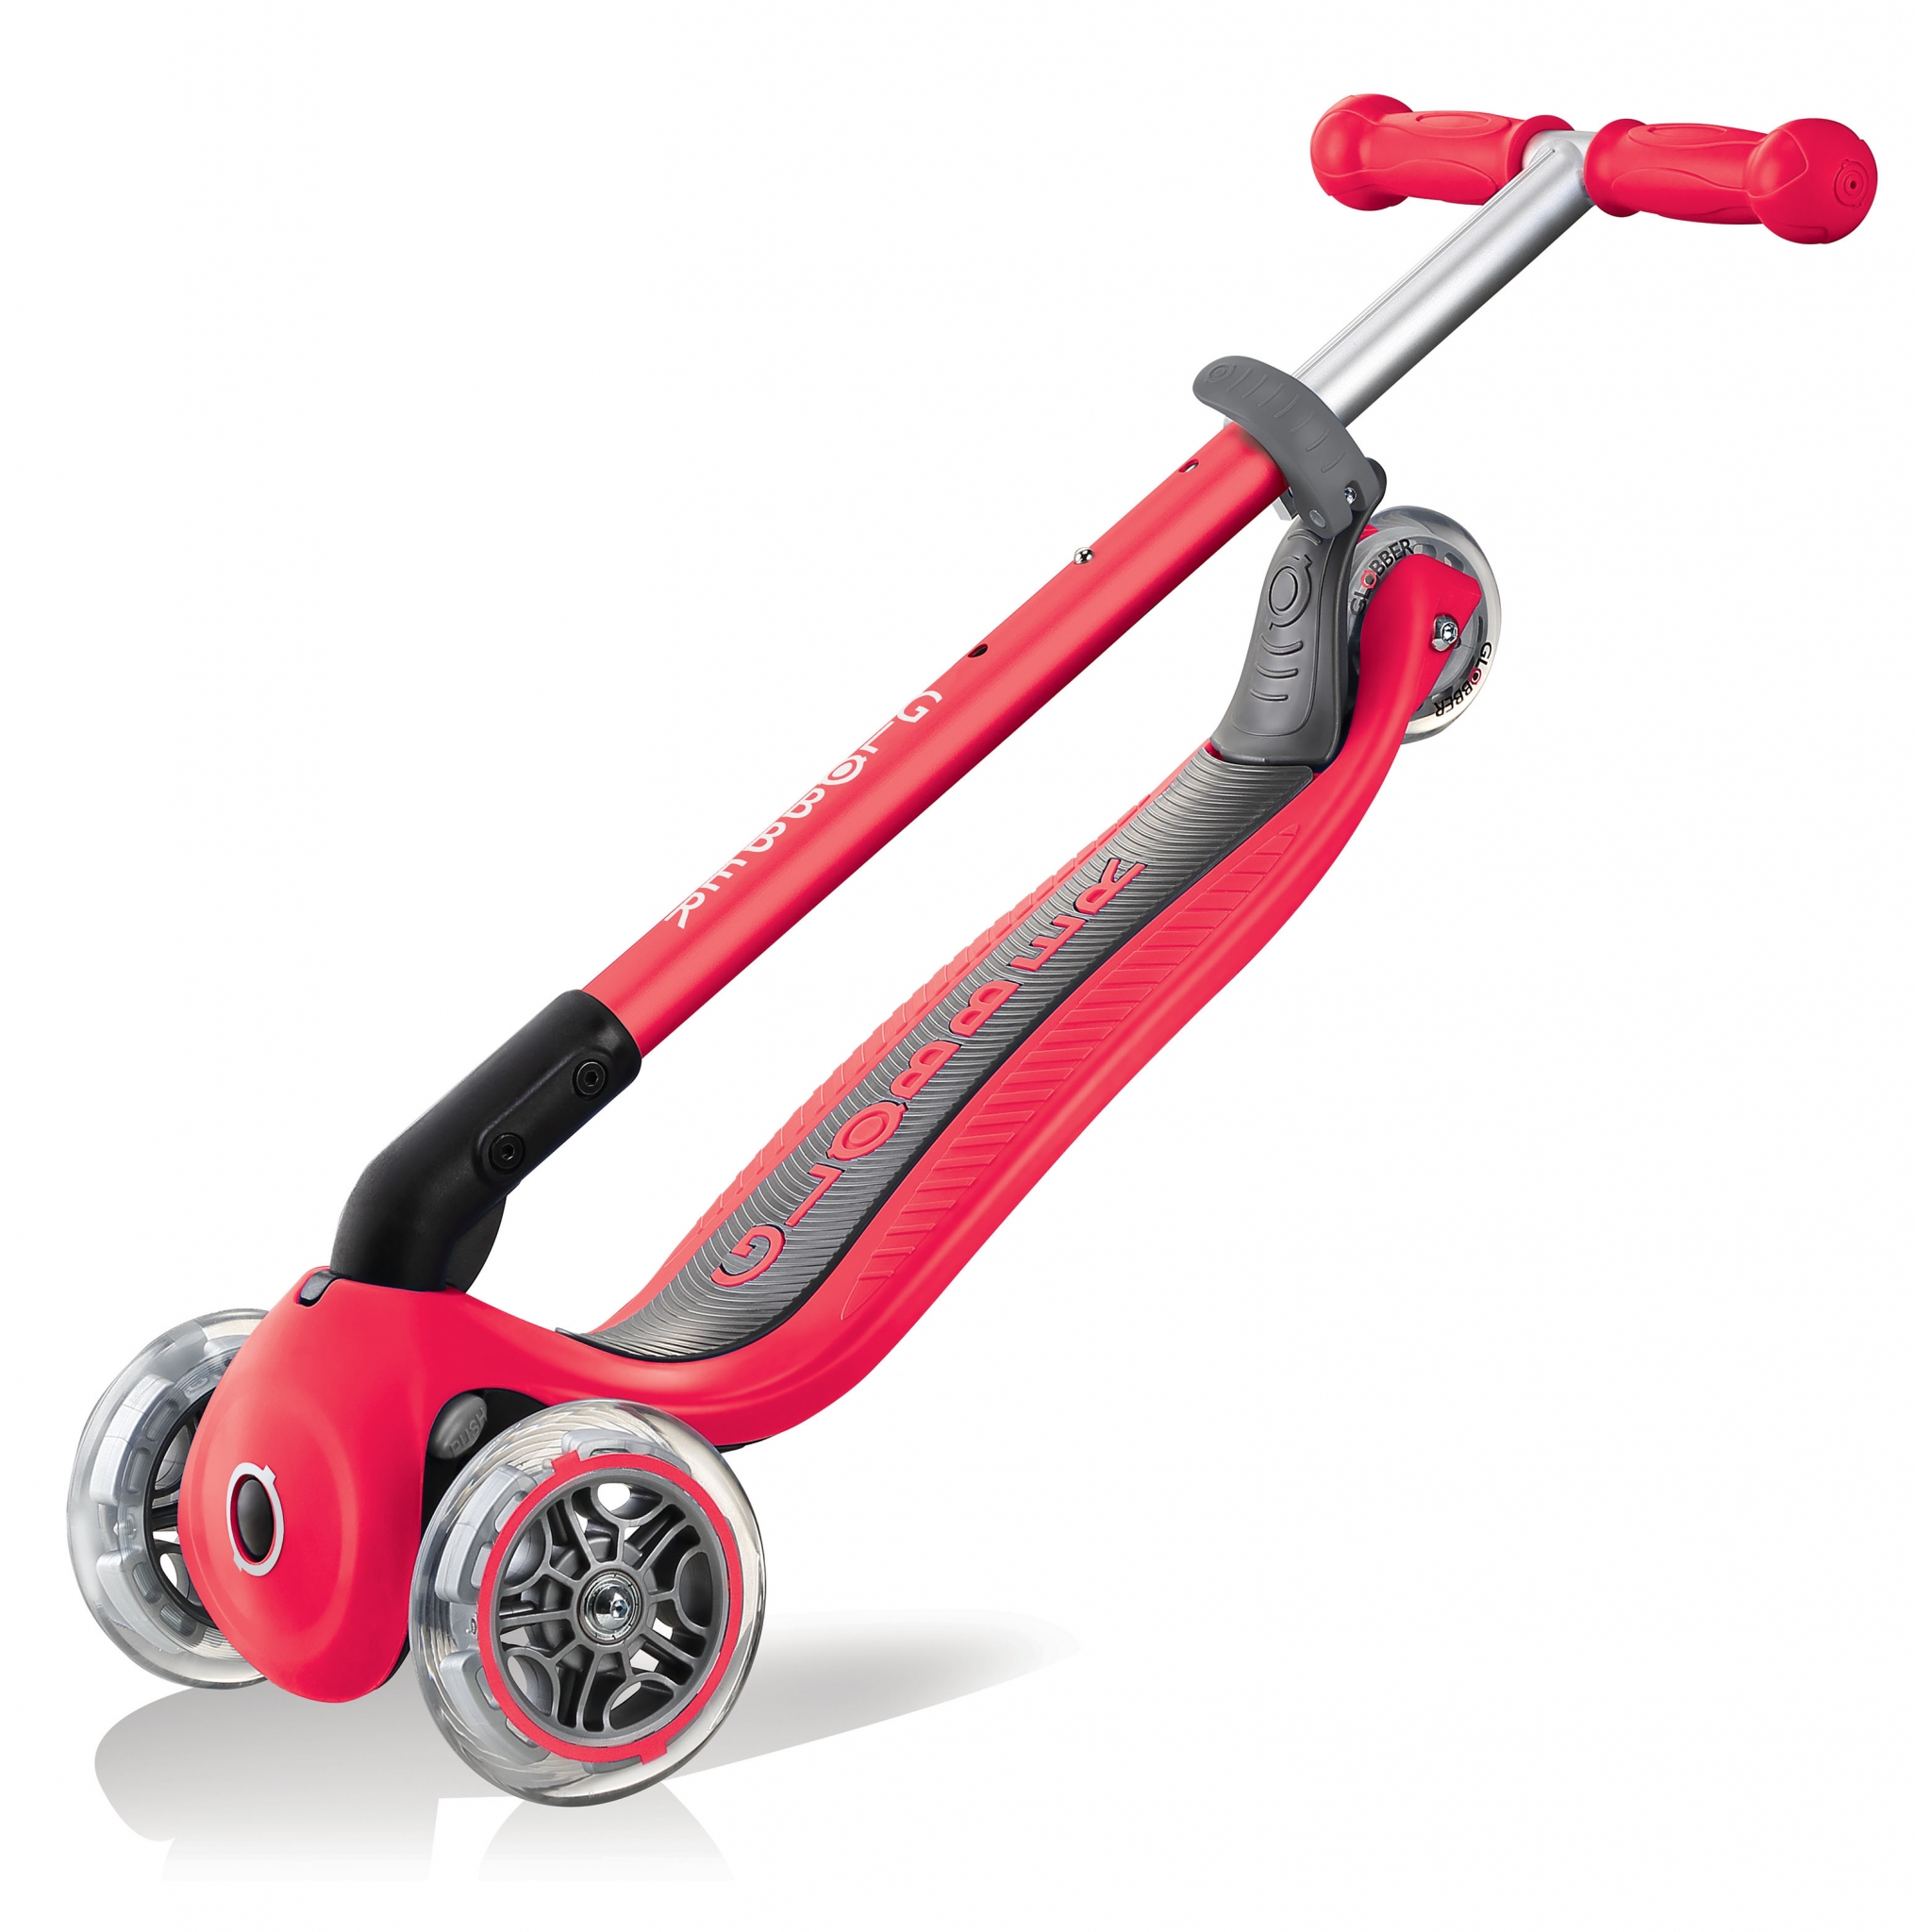 PRIMO-FOLDABLE-3-wheel-foldable-scooter-for-kids-trolley-mode-new-red 4